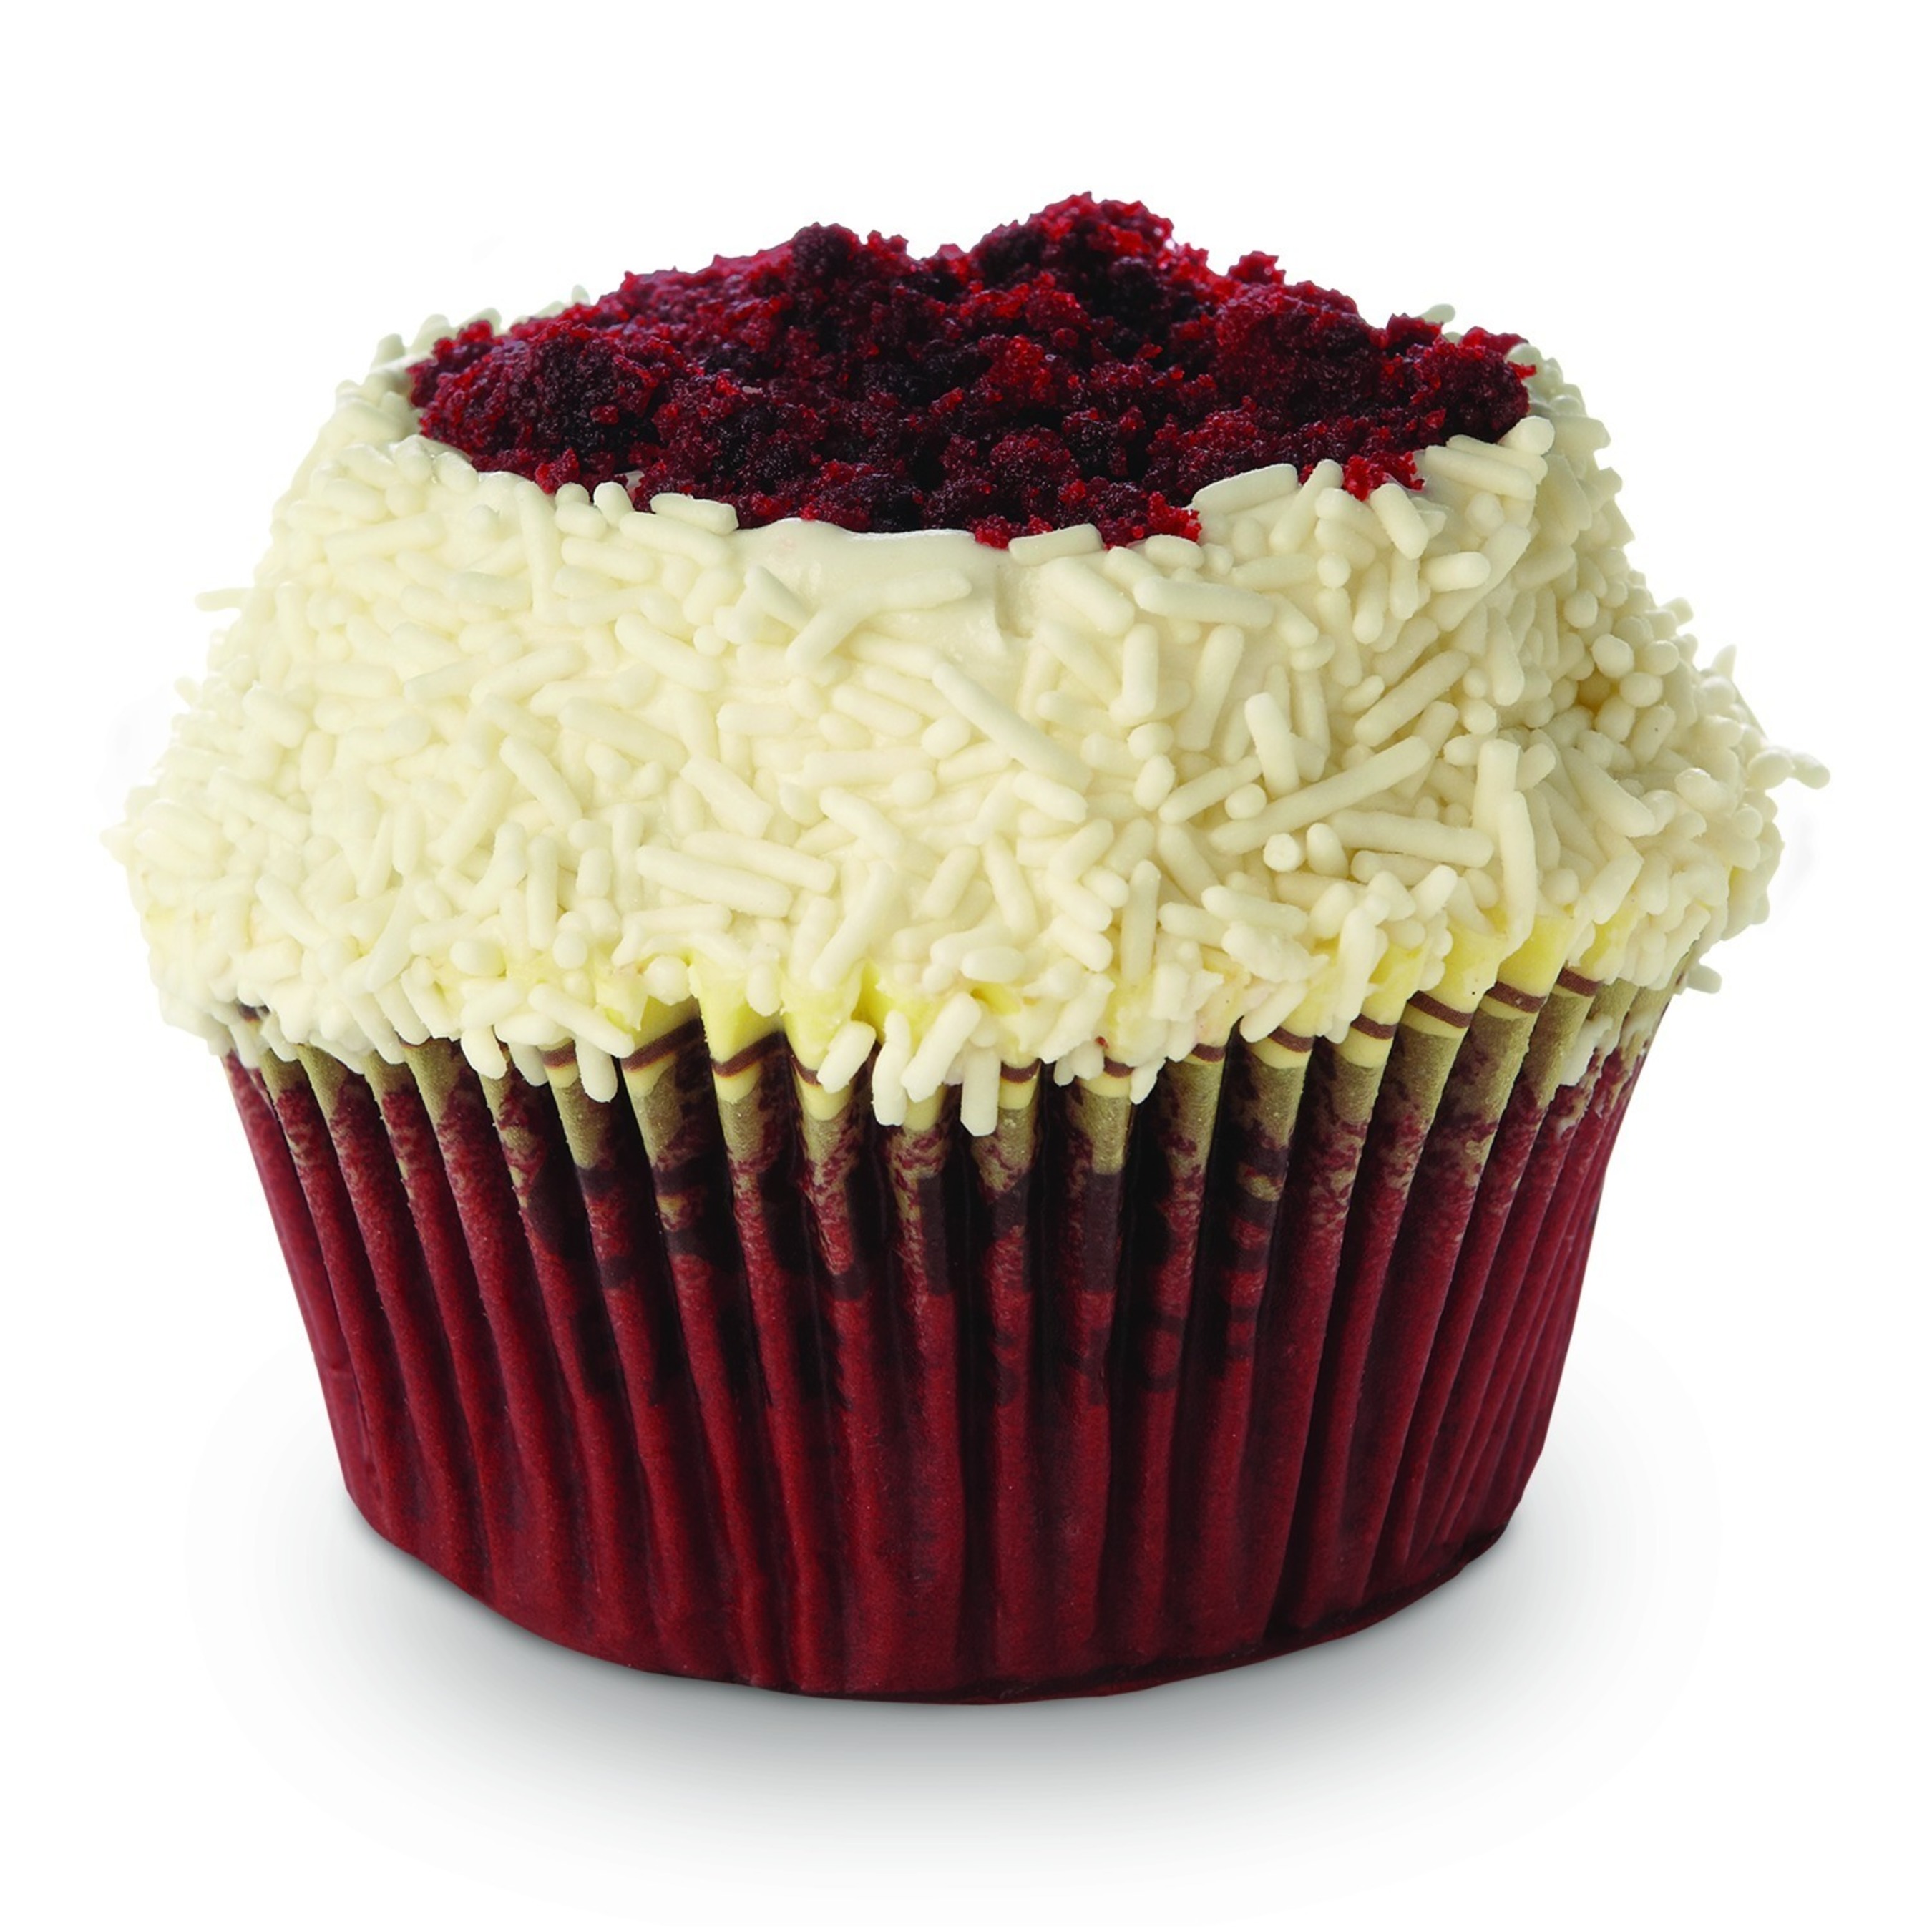 Crumbs Bake Shop Red Velvet cupcake now available at BJ's Wholesale Club's (PRNewsFoto/BJ's Wholesale Club)